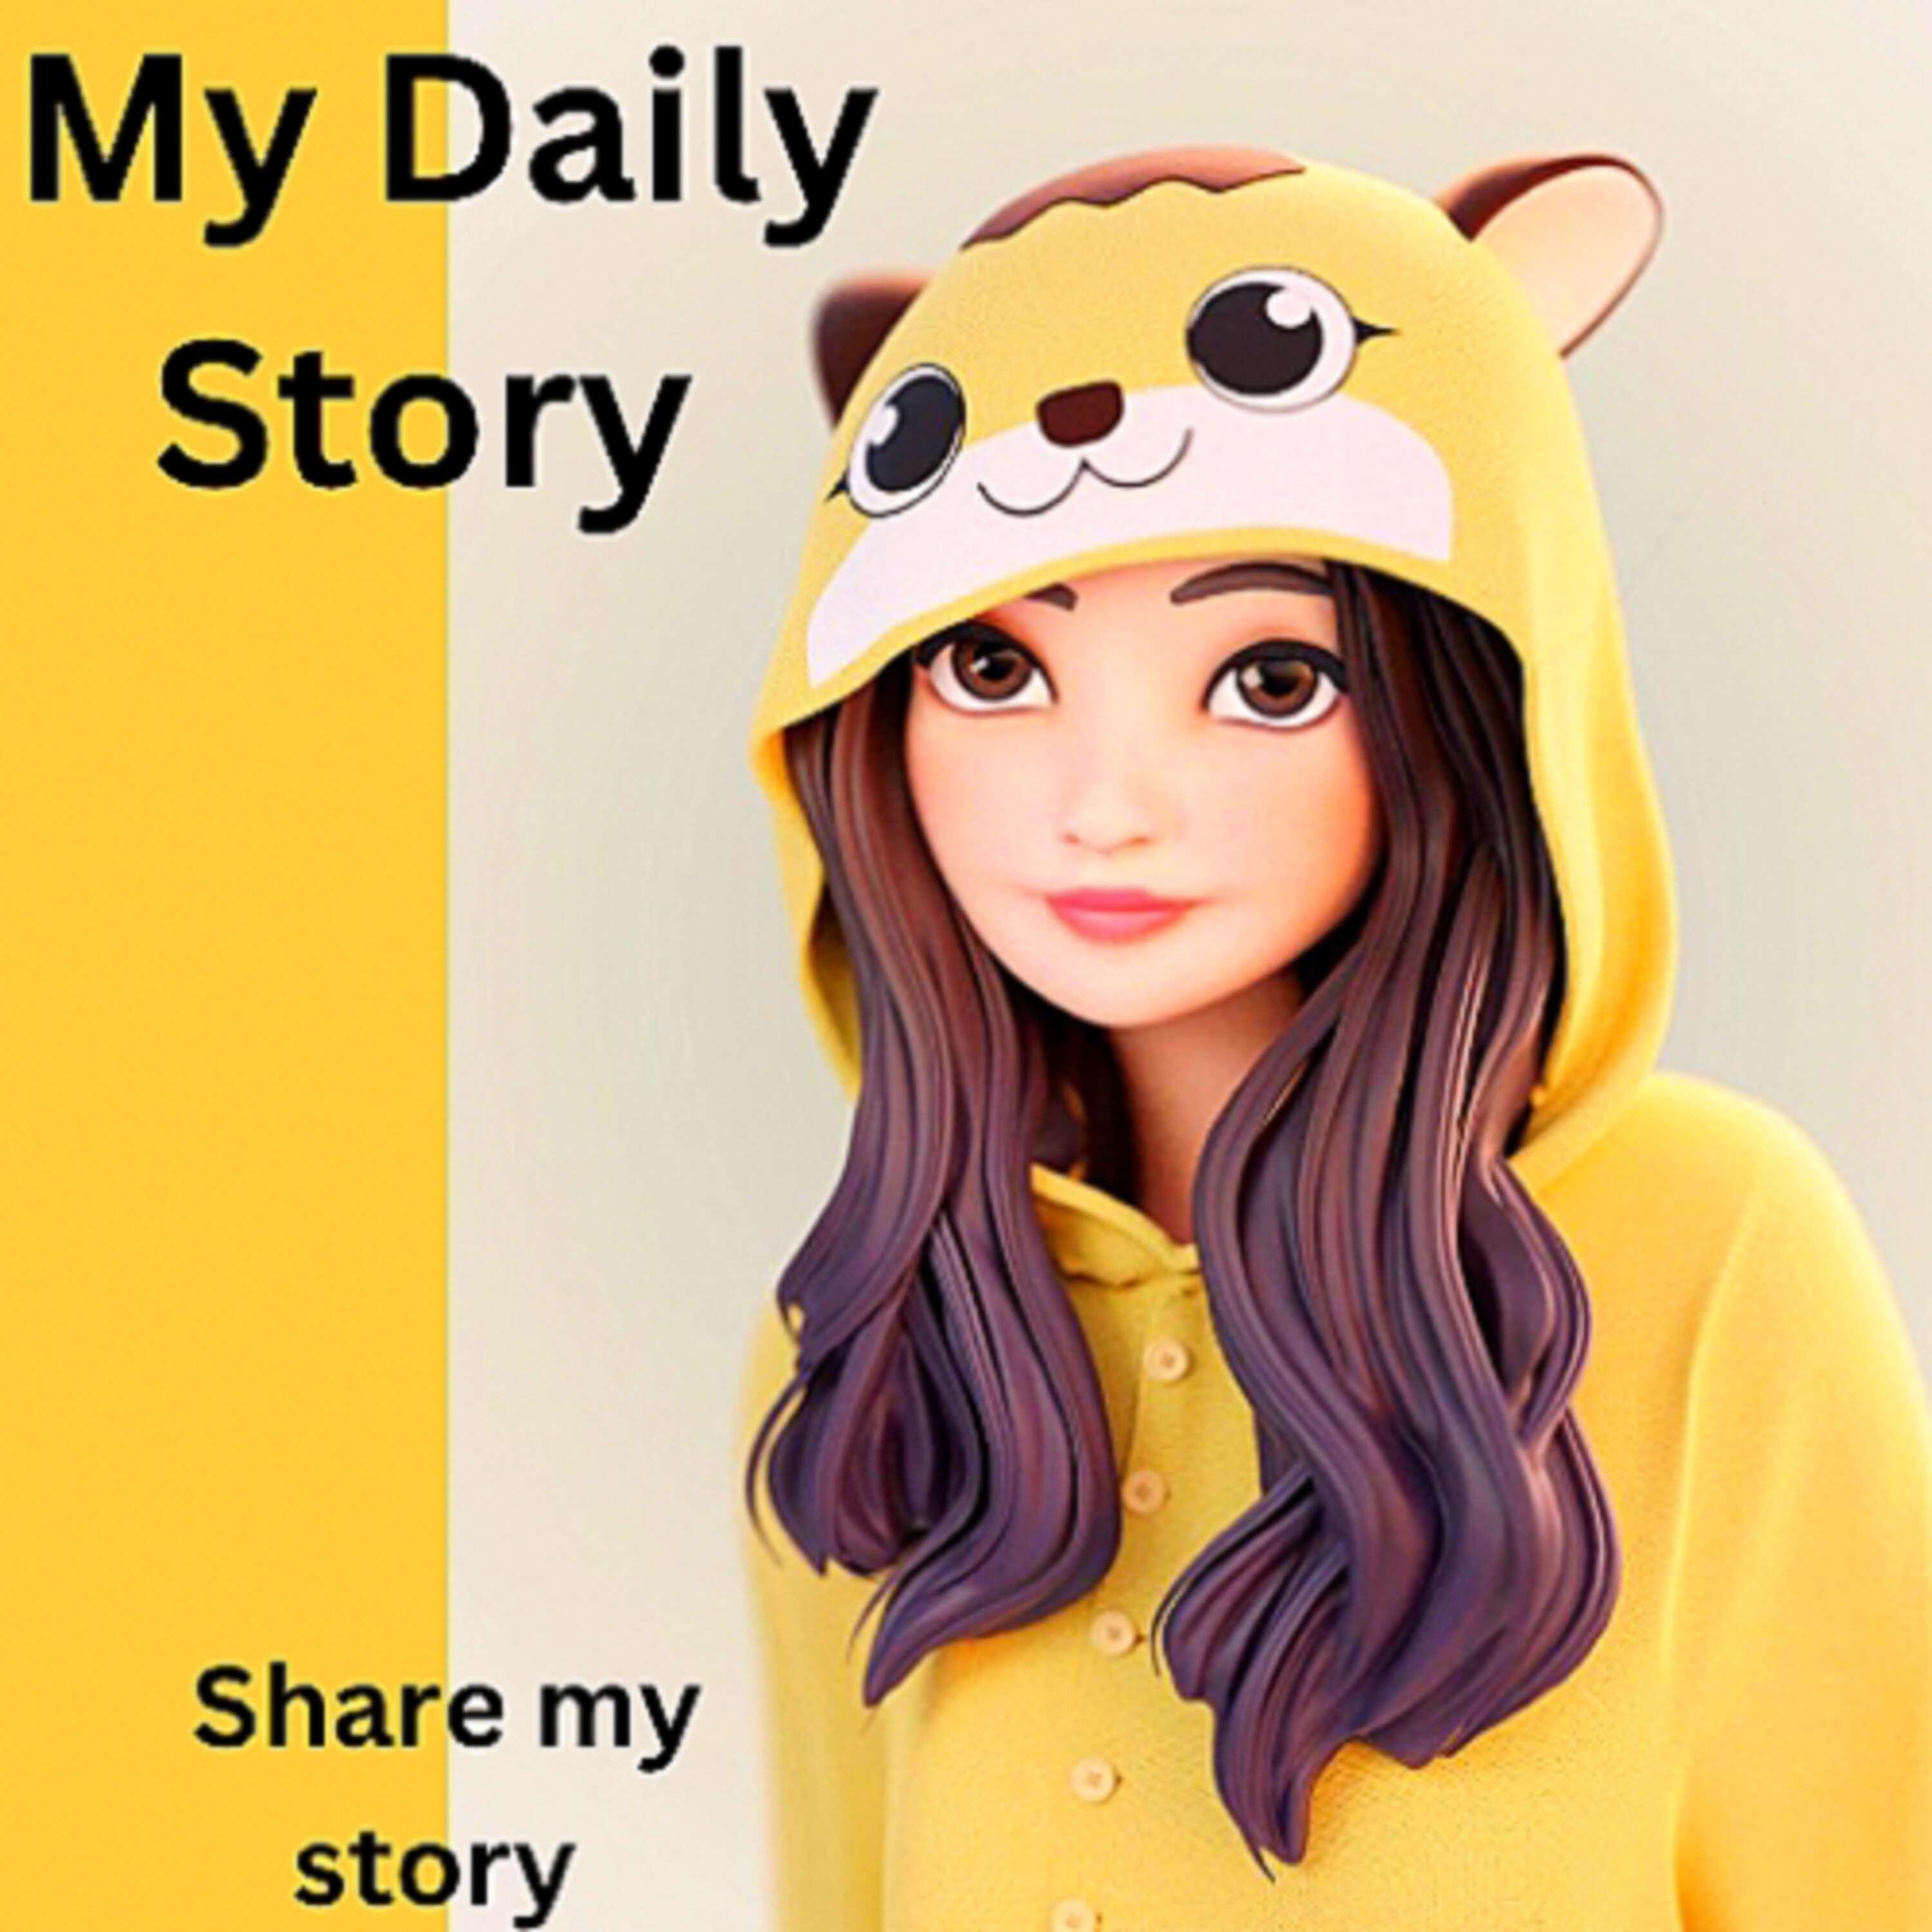 My Daily Story